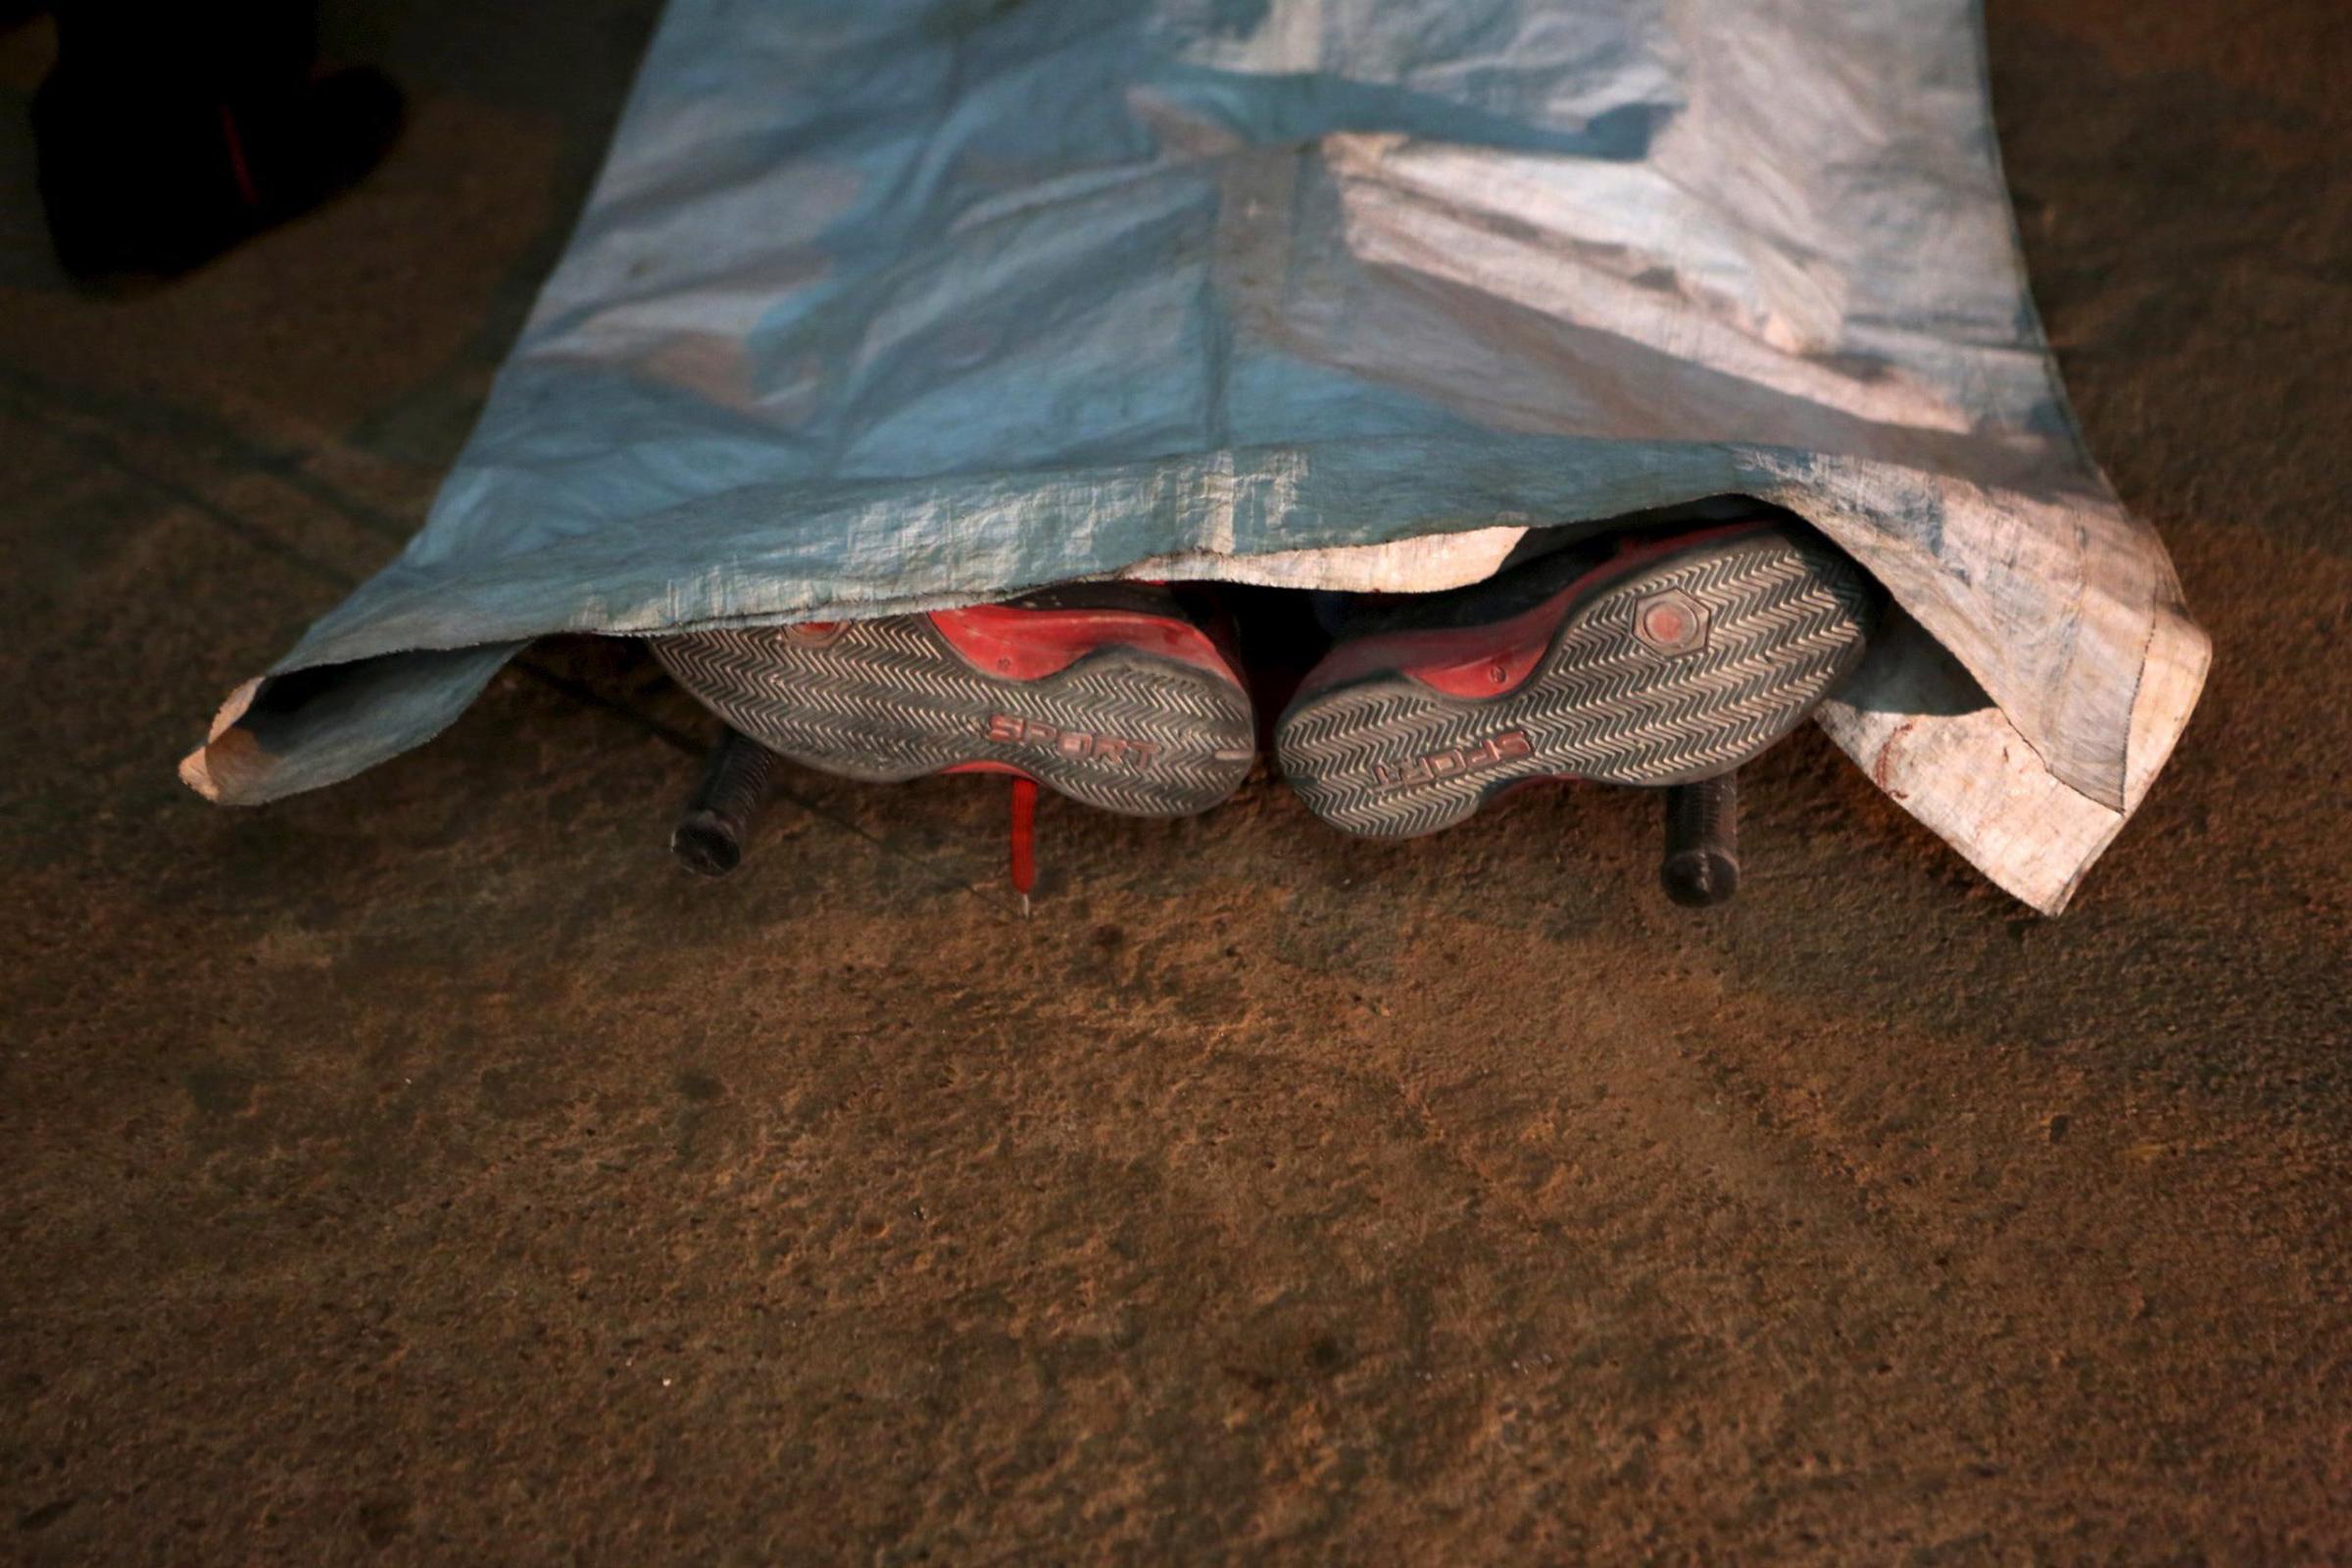 A corpse is seen outside the Radisson hotel in Bamako